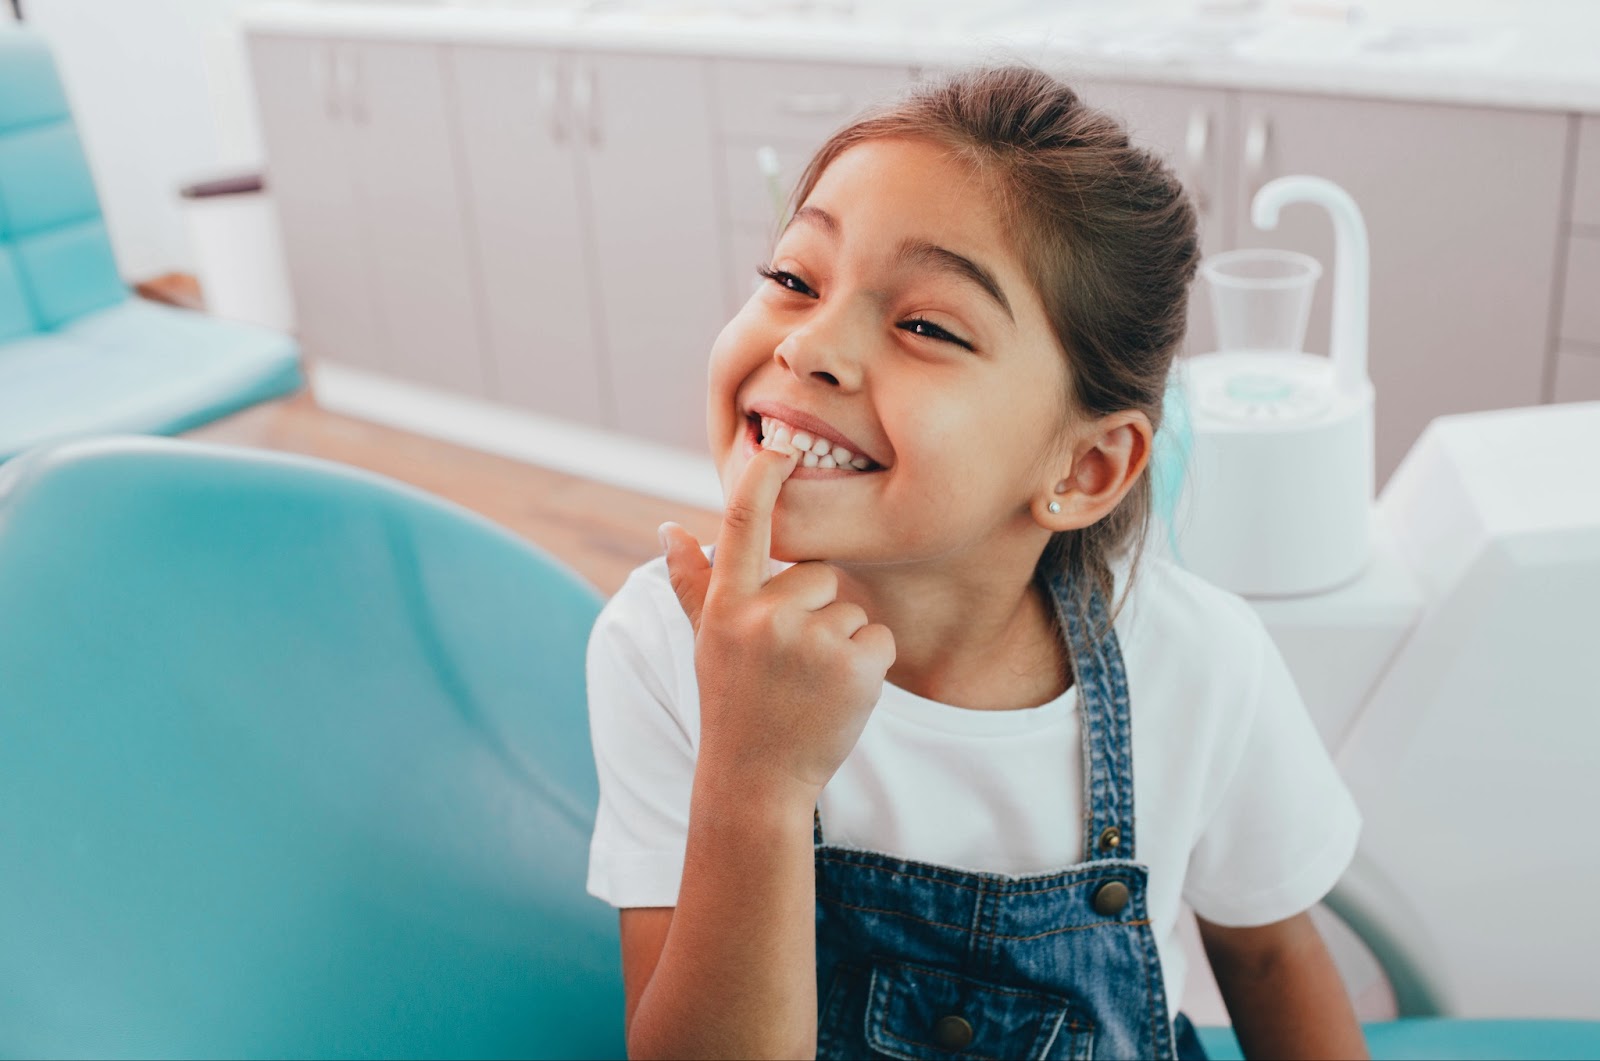 The American Association of Orthodontists and Seabreeze Orthodontics recommend that all children have their first orthodontic consultation by age seven. This allows experienced orthodontists like Dr. Juan to diagnose dental issues before they become more serious.